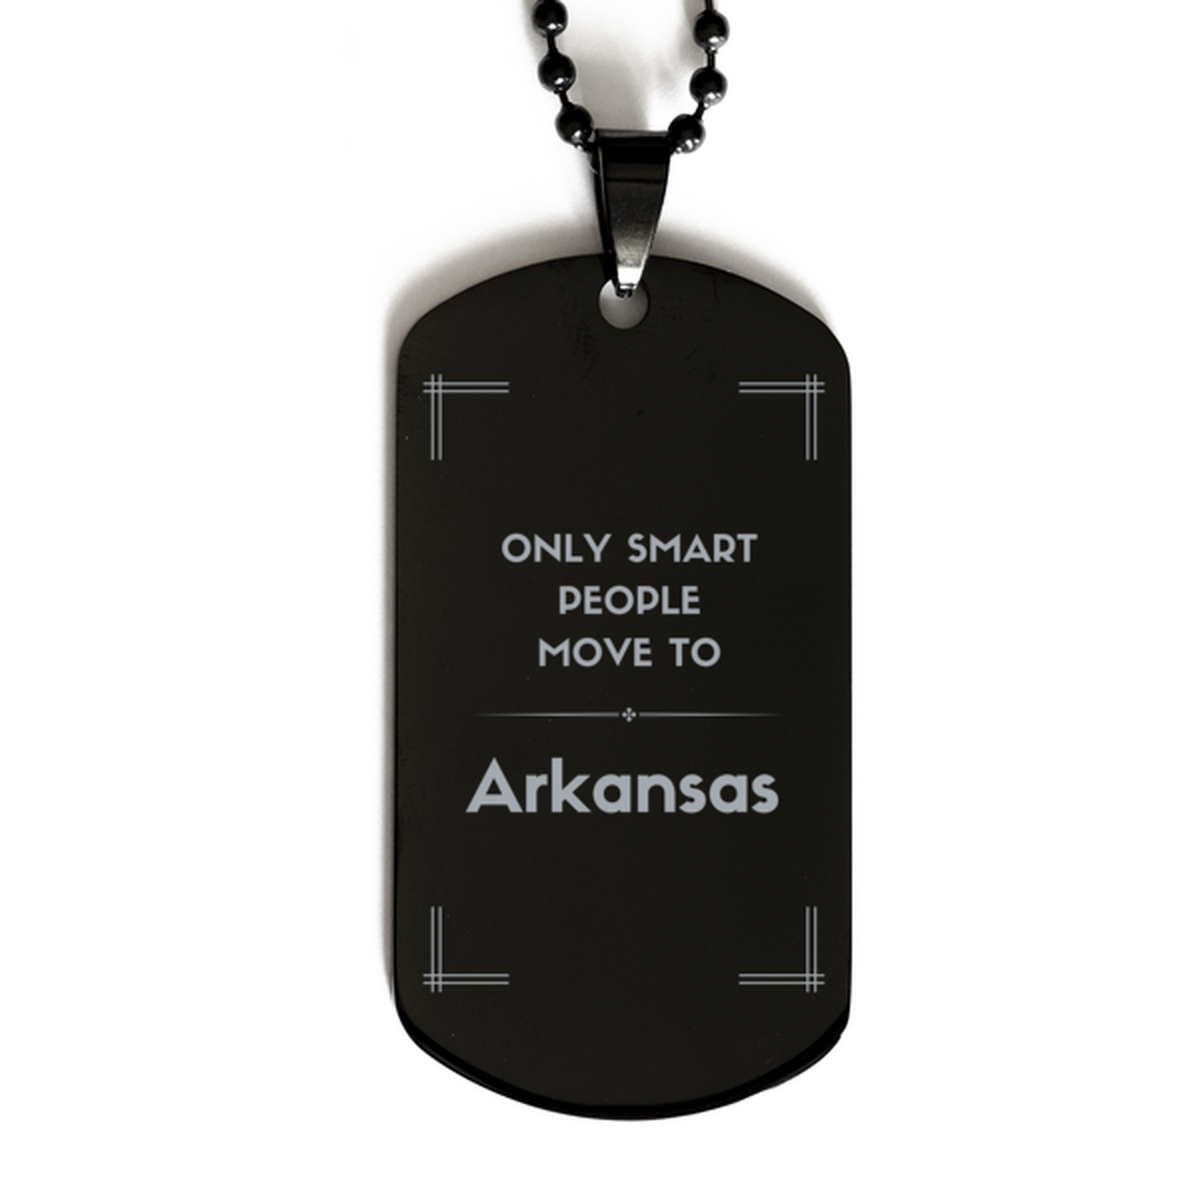 Only smart people move to Arkansas Black Dog Tag, Gag Gifts For Arkansas, Move to Arkansas Gifts for Friends Coworker Funny Saying Quote